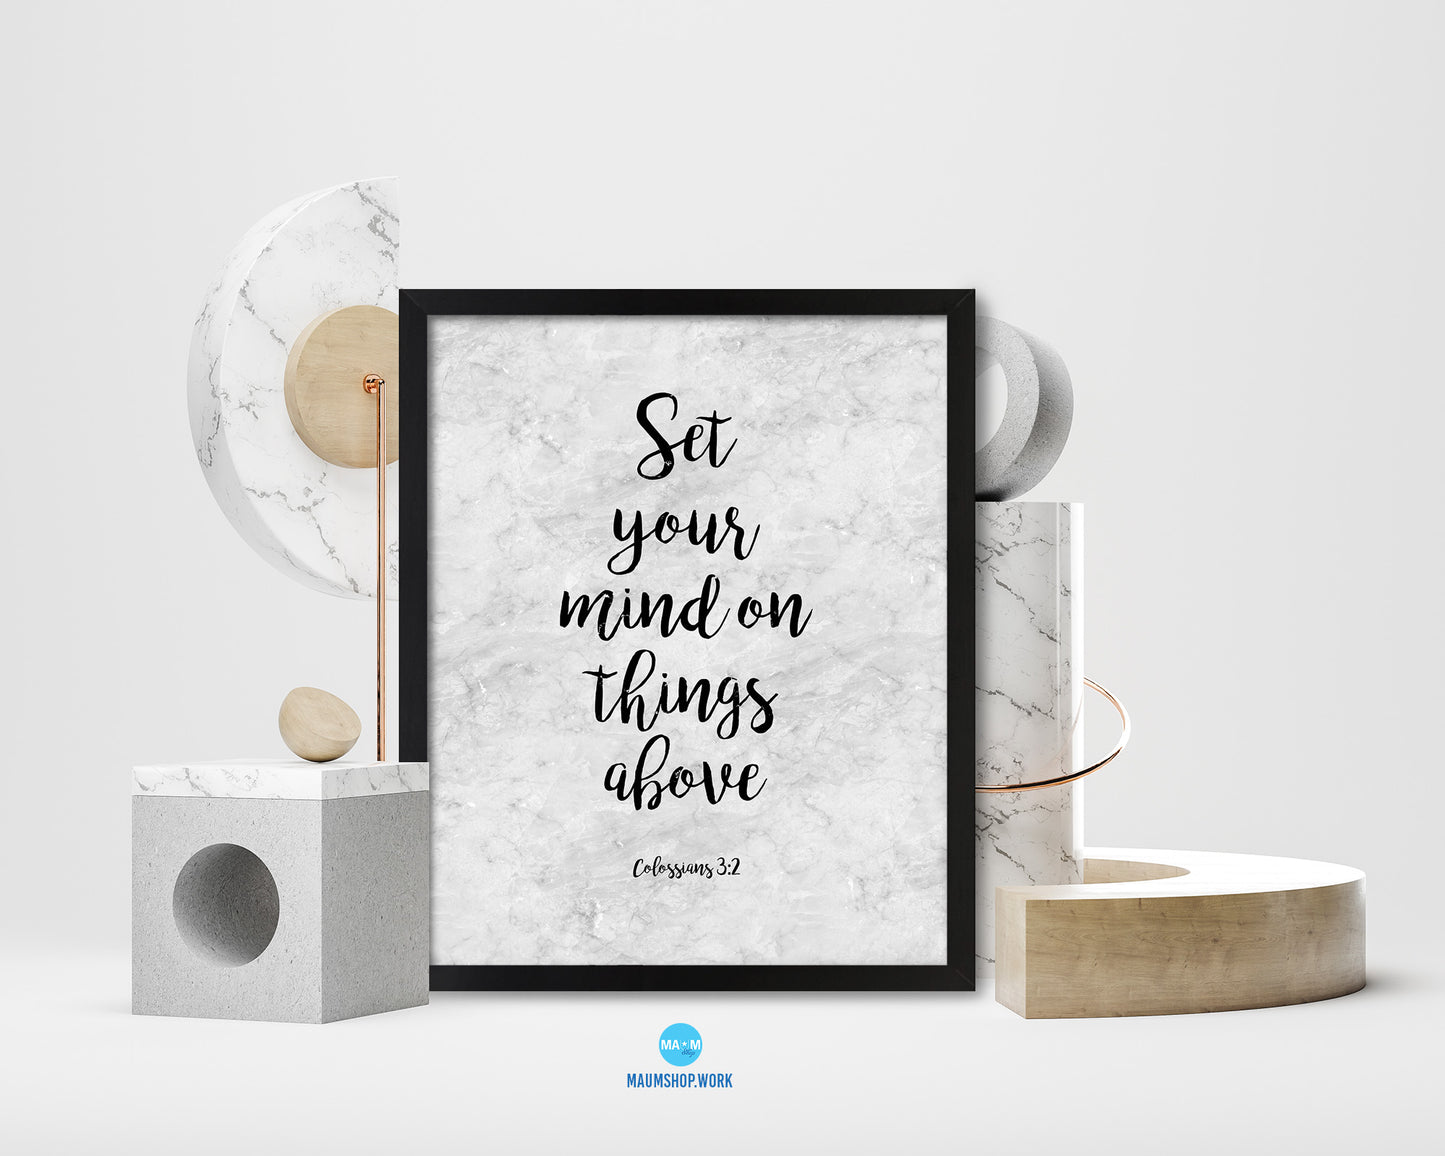 Set your mind on things above, Colossians 3:2 Bible Scripture Verse Framed Print Wall Art Decor Gifts